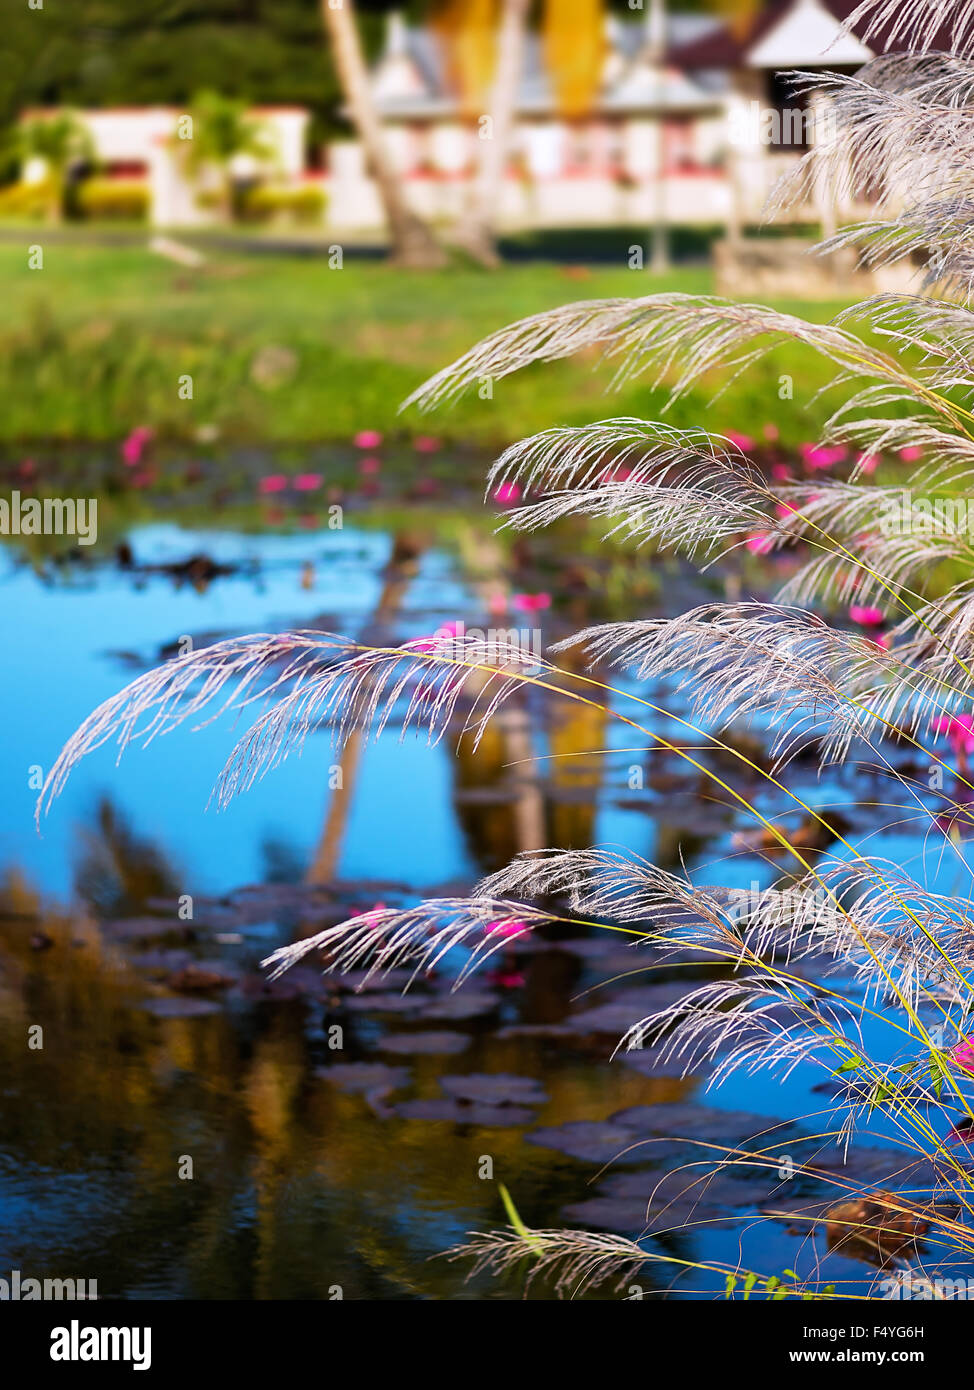 RELAXING POND OF LILIES AND TALL GRASS TOBAGO NATURE Stock Photo